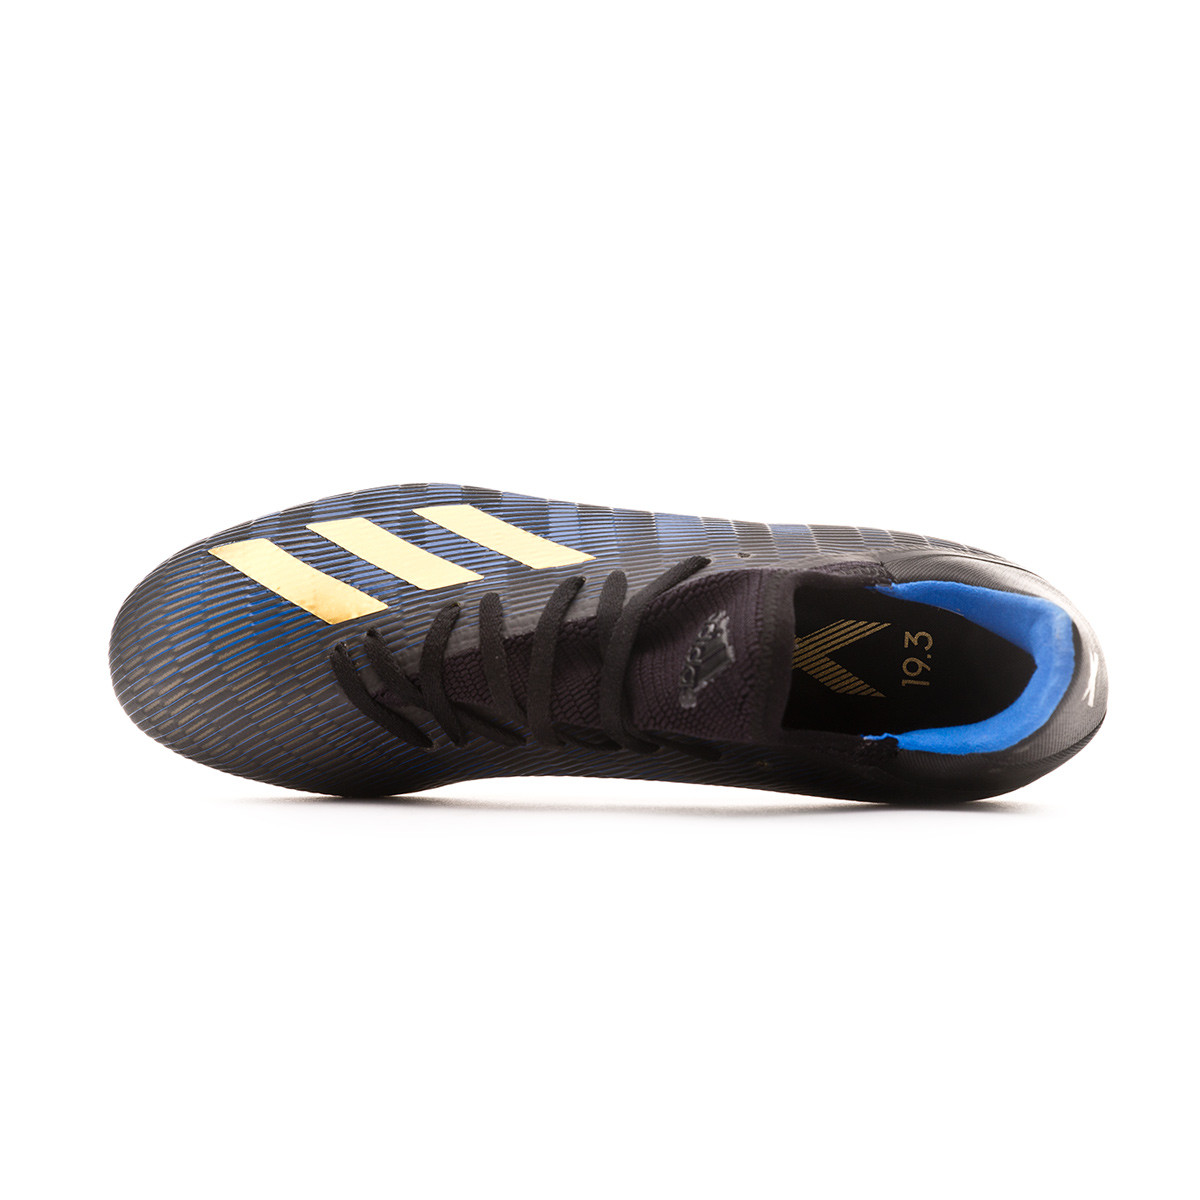 adidas x 19.3 black and gold